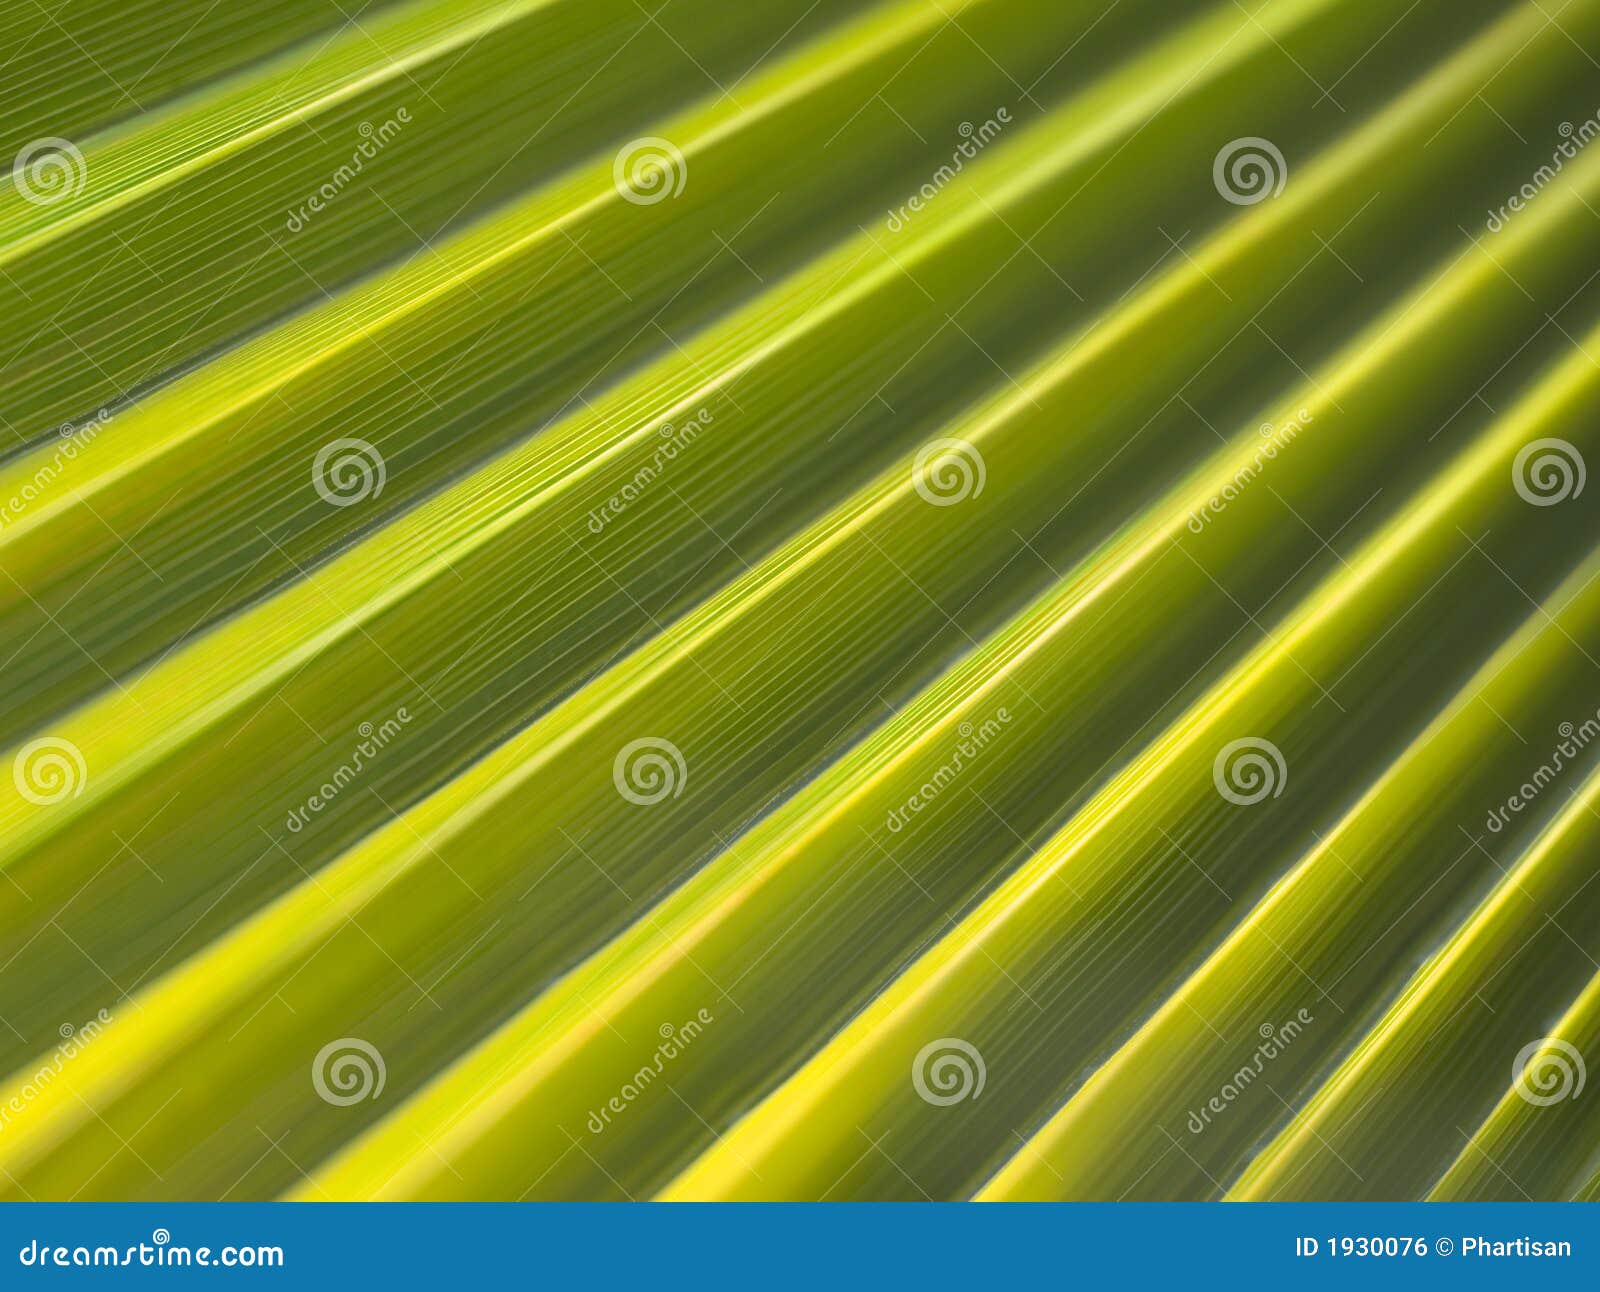 Abstract Palm Leaf Background Stock Photo - Image of tropical, nature